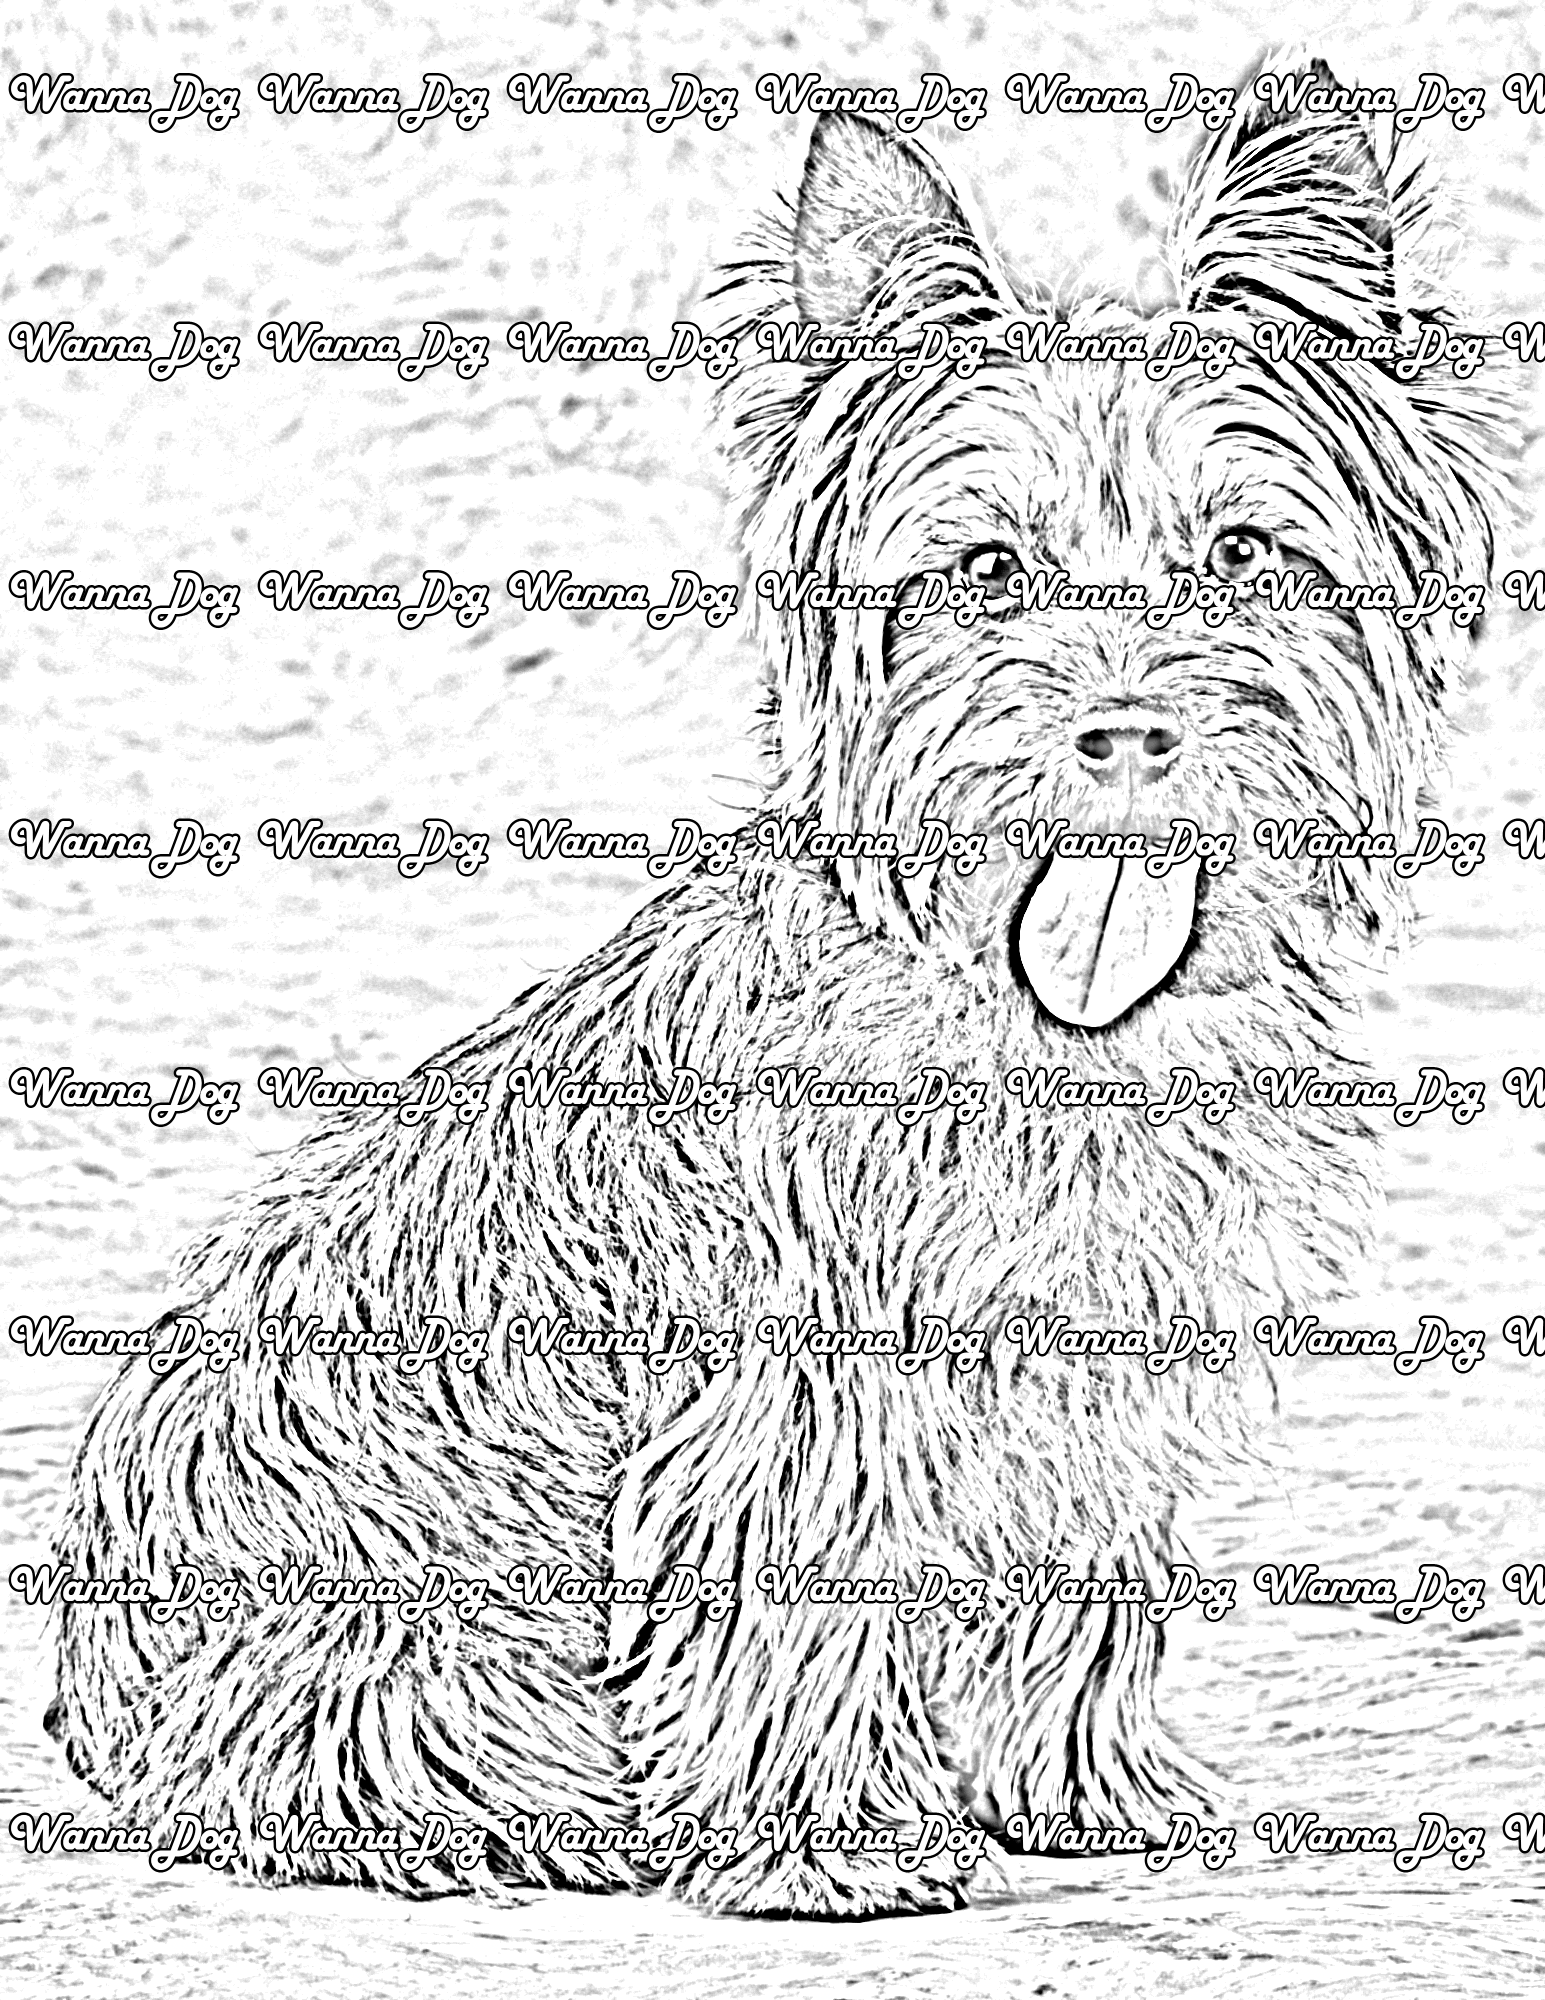 Yorkshire Terrier Coloring Pages of a Yorkshire Terrier smiling